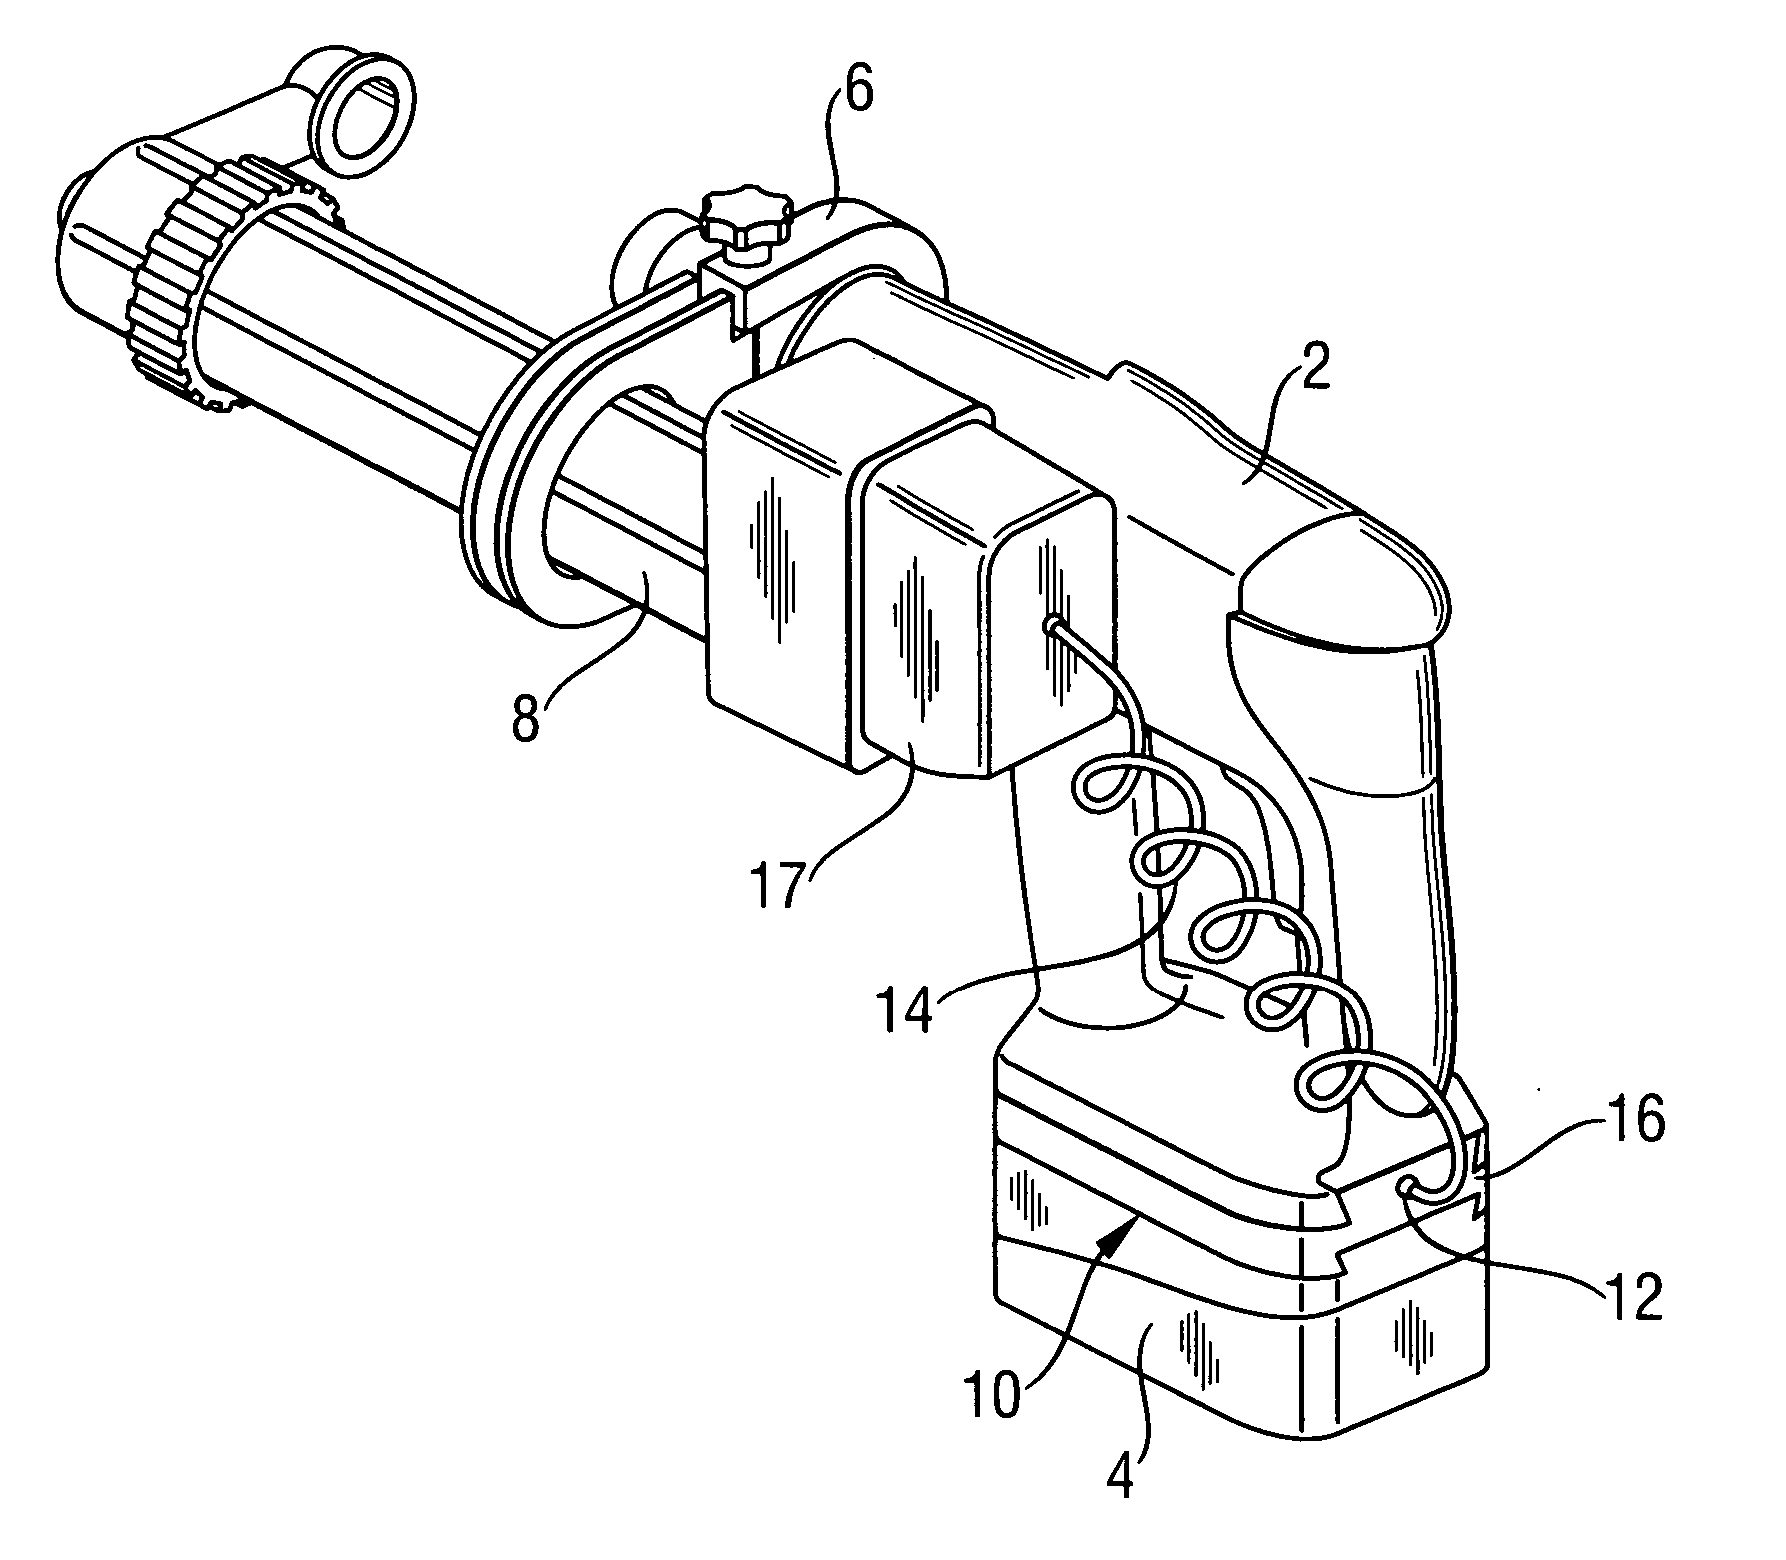 Electrical connection arrangement for hand-held tools with auxiliary devices